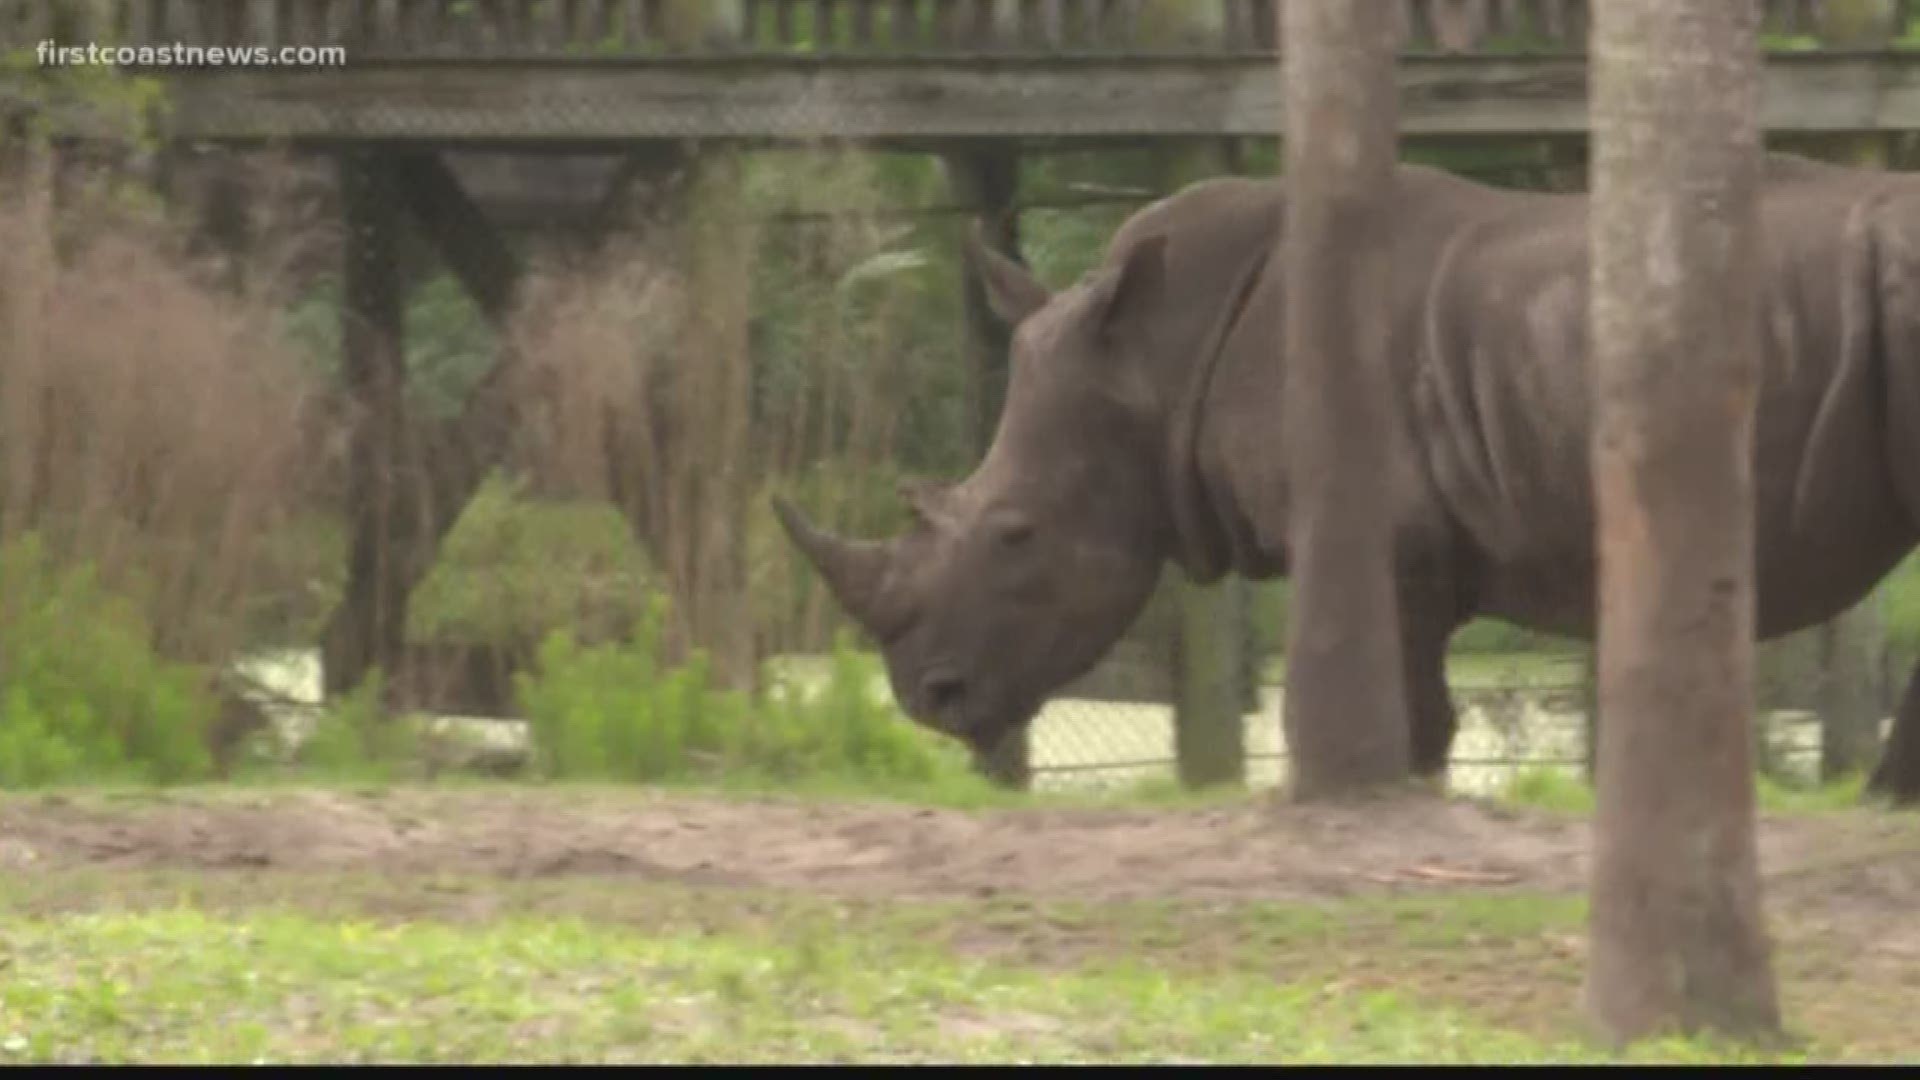 These measures are being made months after a zookeeper was hurt by a rhino during a routine exam.